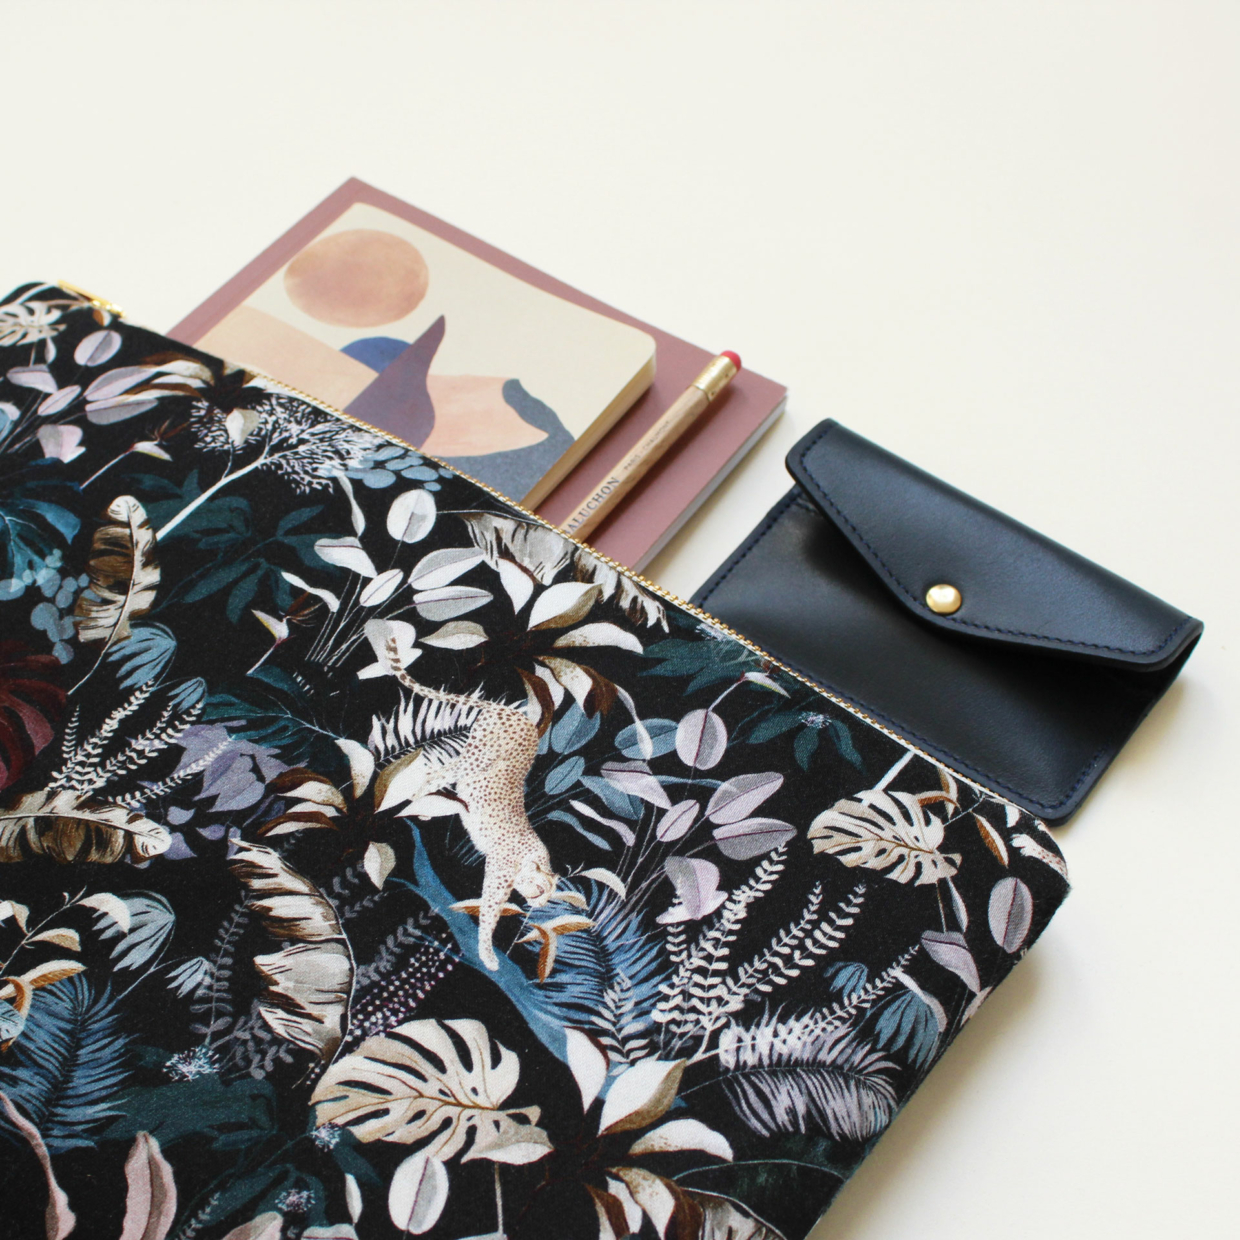 Our large pouch is the perfect size to compartmentalise your handbag